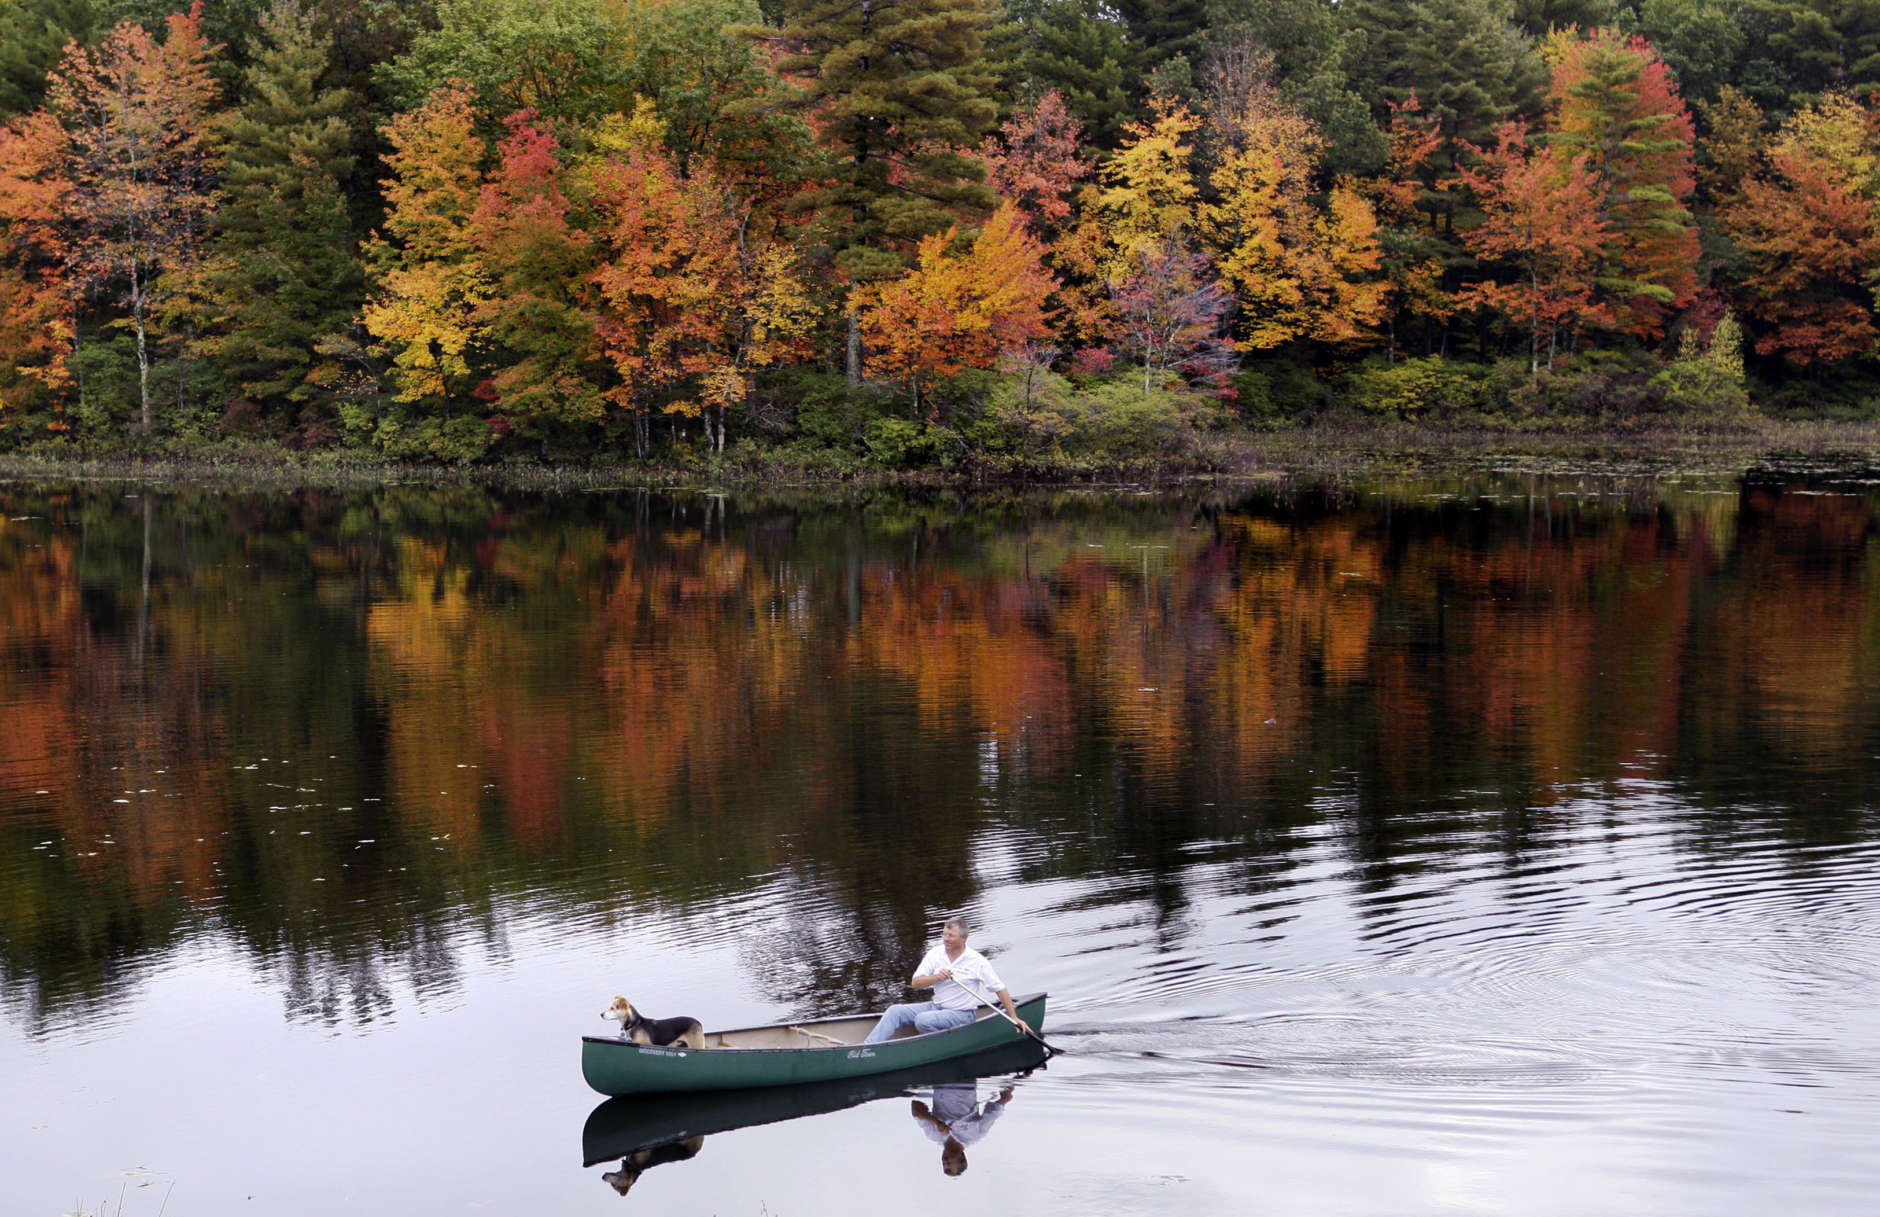 With trees showing their fall foliage colors, Peter Sterrett of Tiverton, R.I., paddles with his dog Cody on a pond in Derry, N.H., Sunday mornin, Oct. 4, 2009. (AP Photo/Charles Krupa)